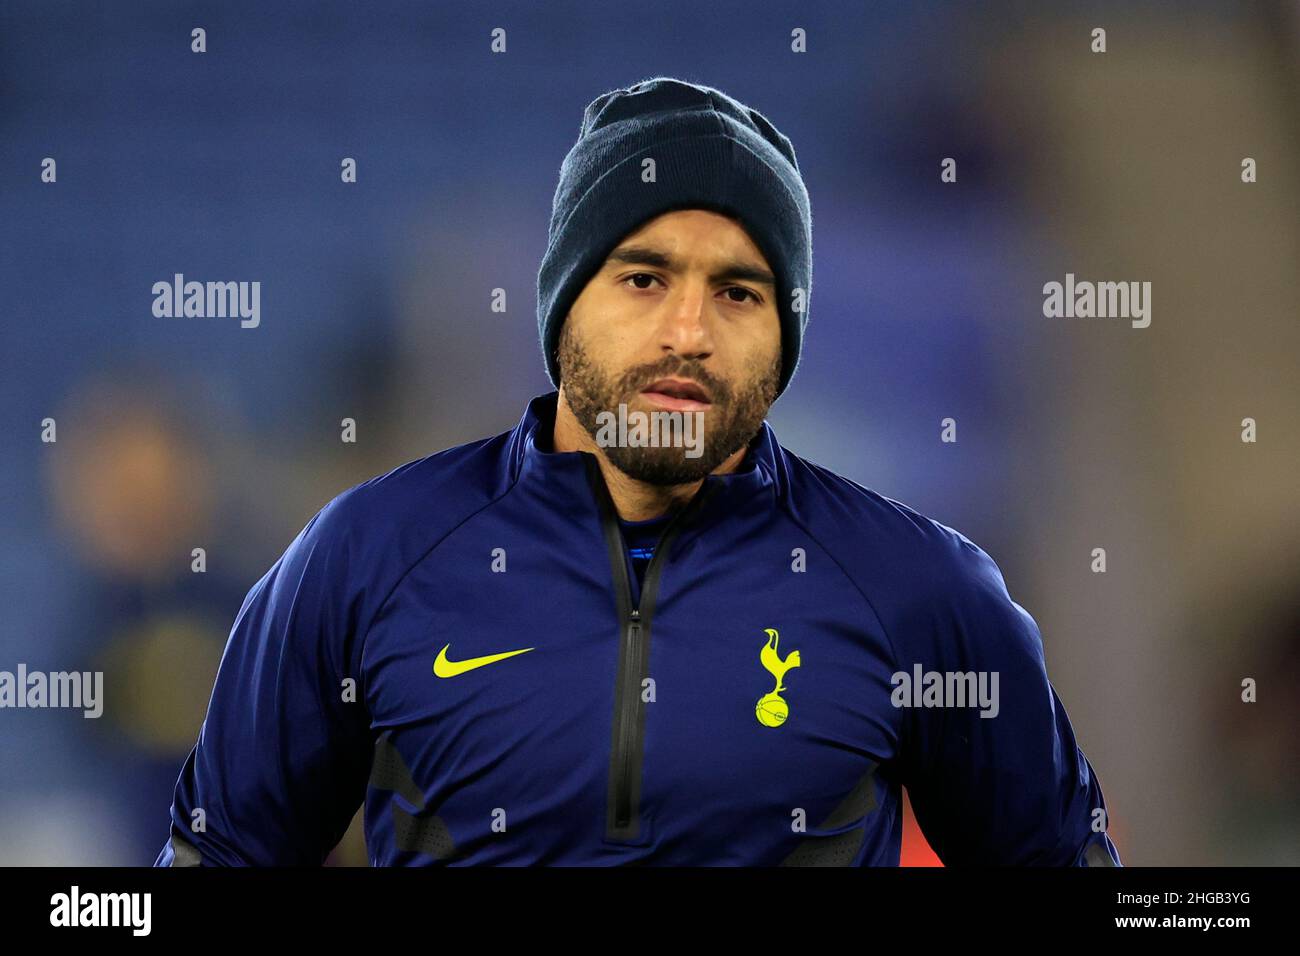 Lucas Moura #27 of Tottenham Hotspur during the warm up for the game Stock Photo